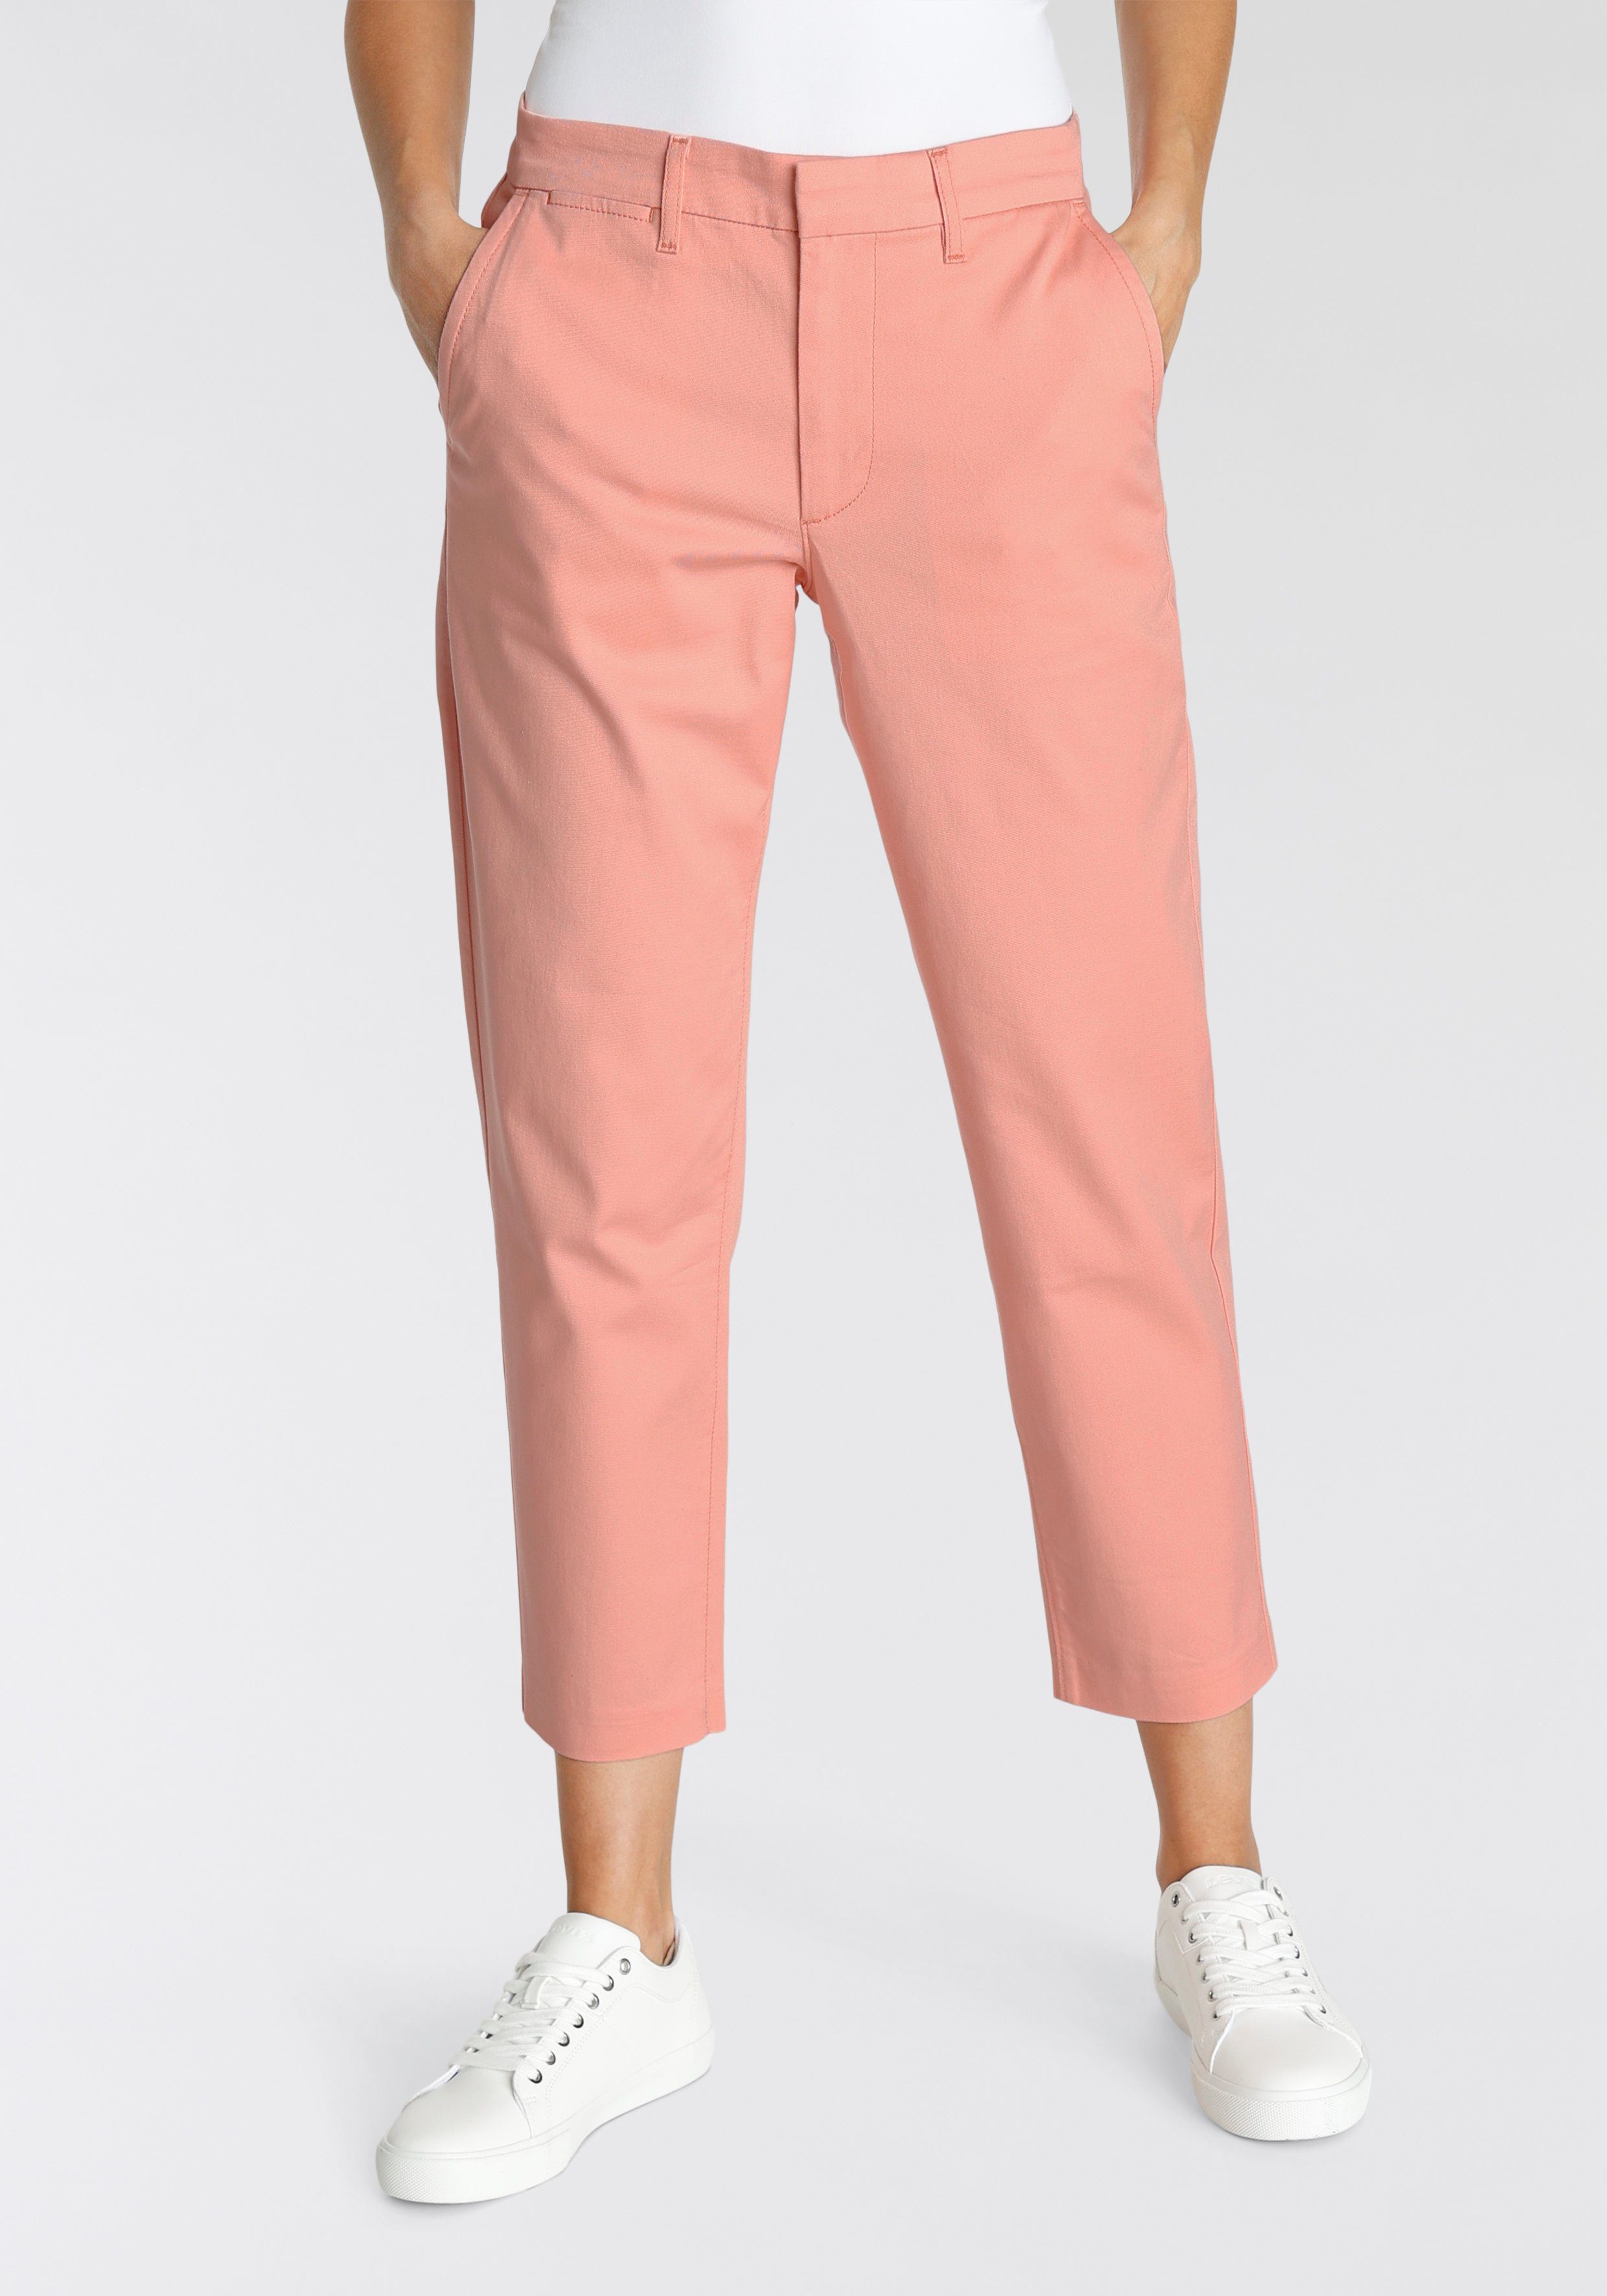 ESSENTIAL Levi's® Chinohose coral pink